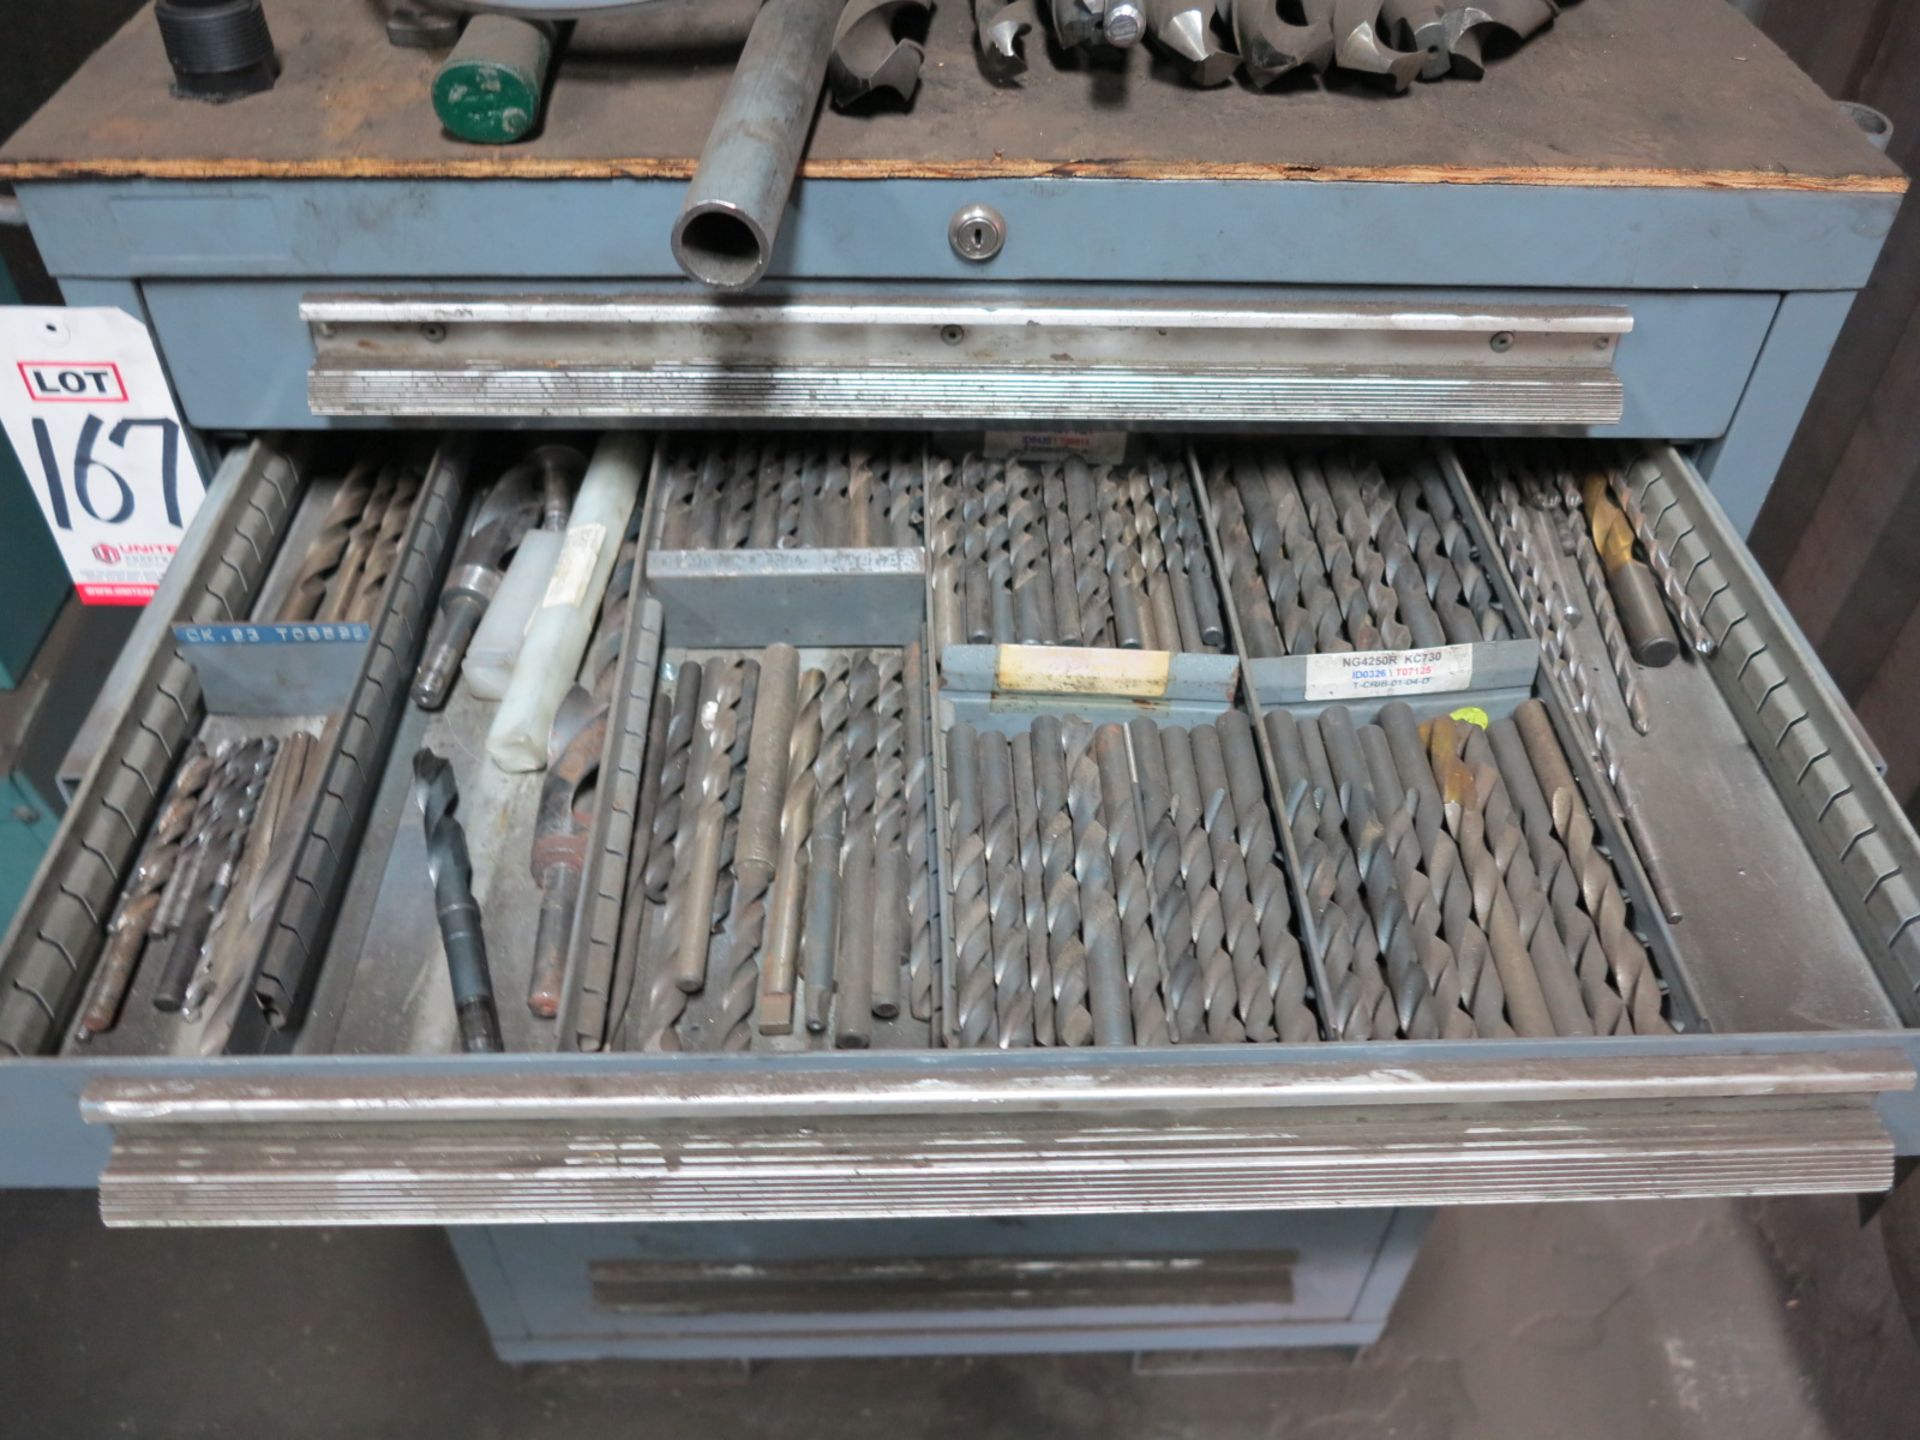 LOT - 7-DRAWER TOOL CABINET FULL OF MORRIS TAPER DRILLS, INCLUDES SMALL TOOL BOX ON TOP - Image 3 of 7